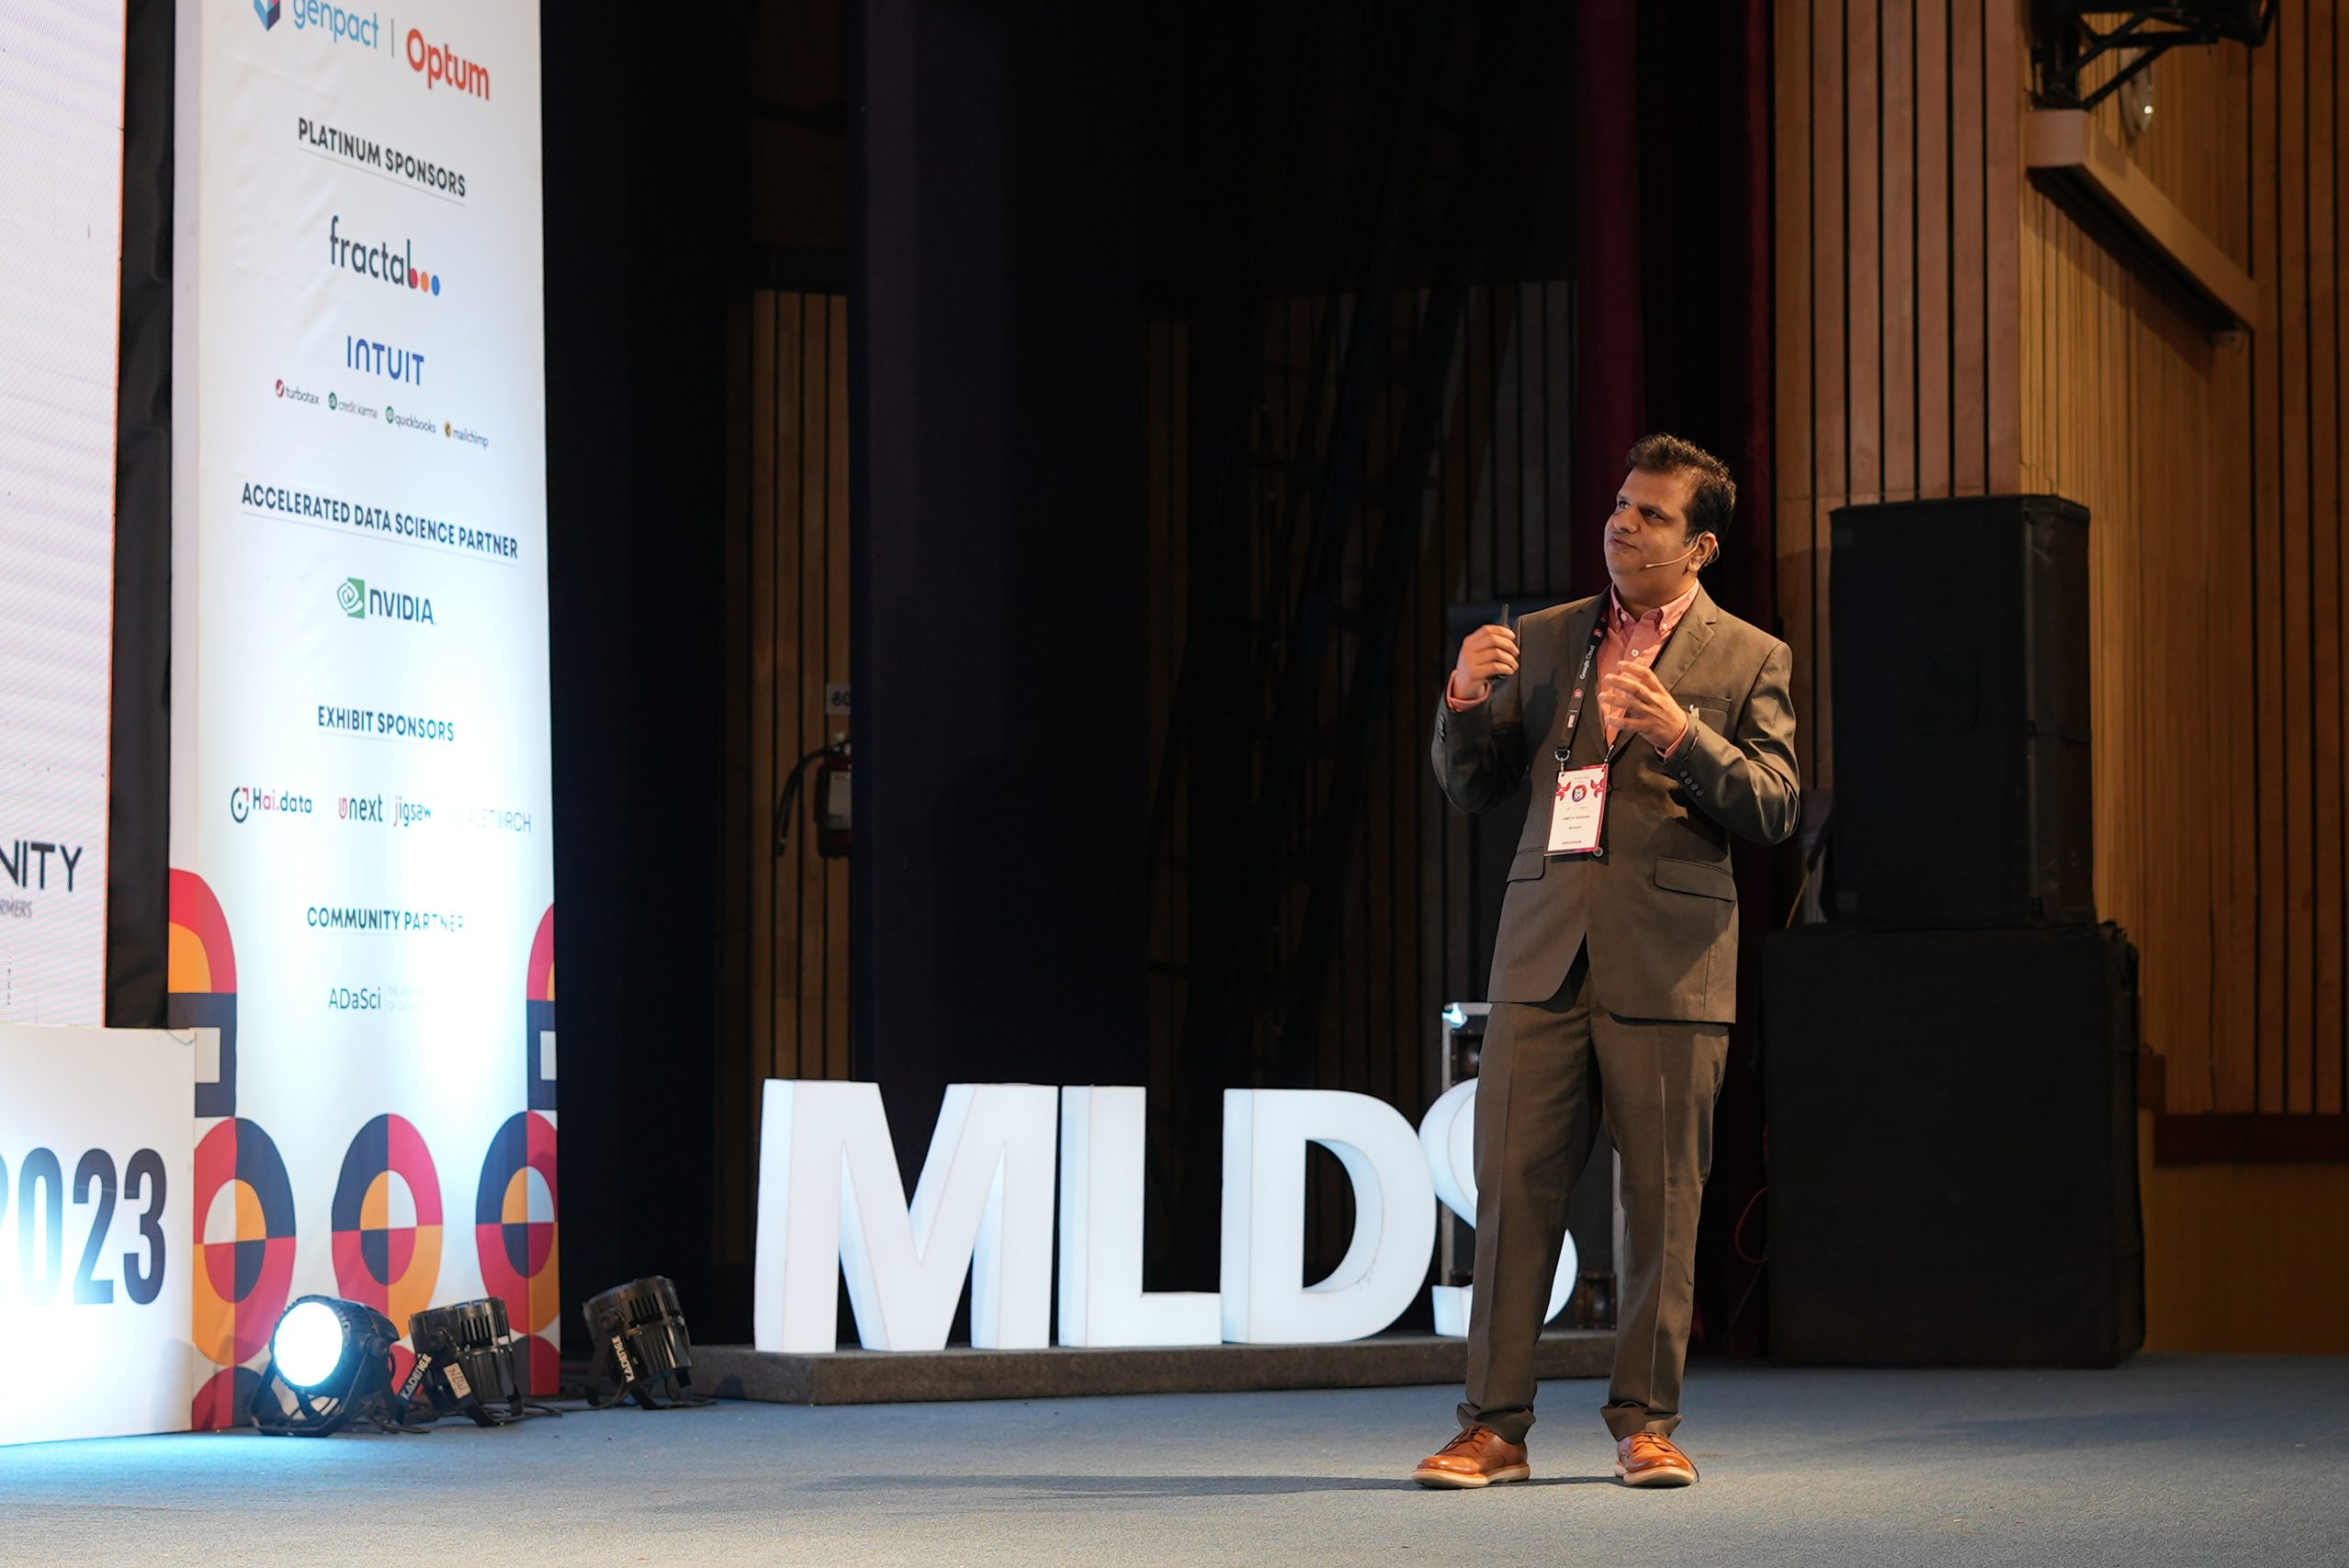 Top 5 Papers Presented at MLDS 2023